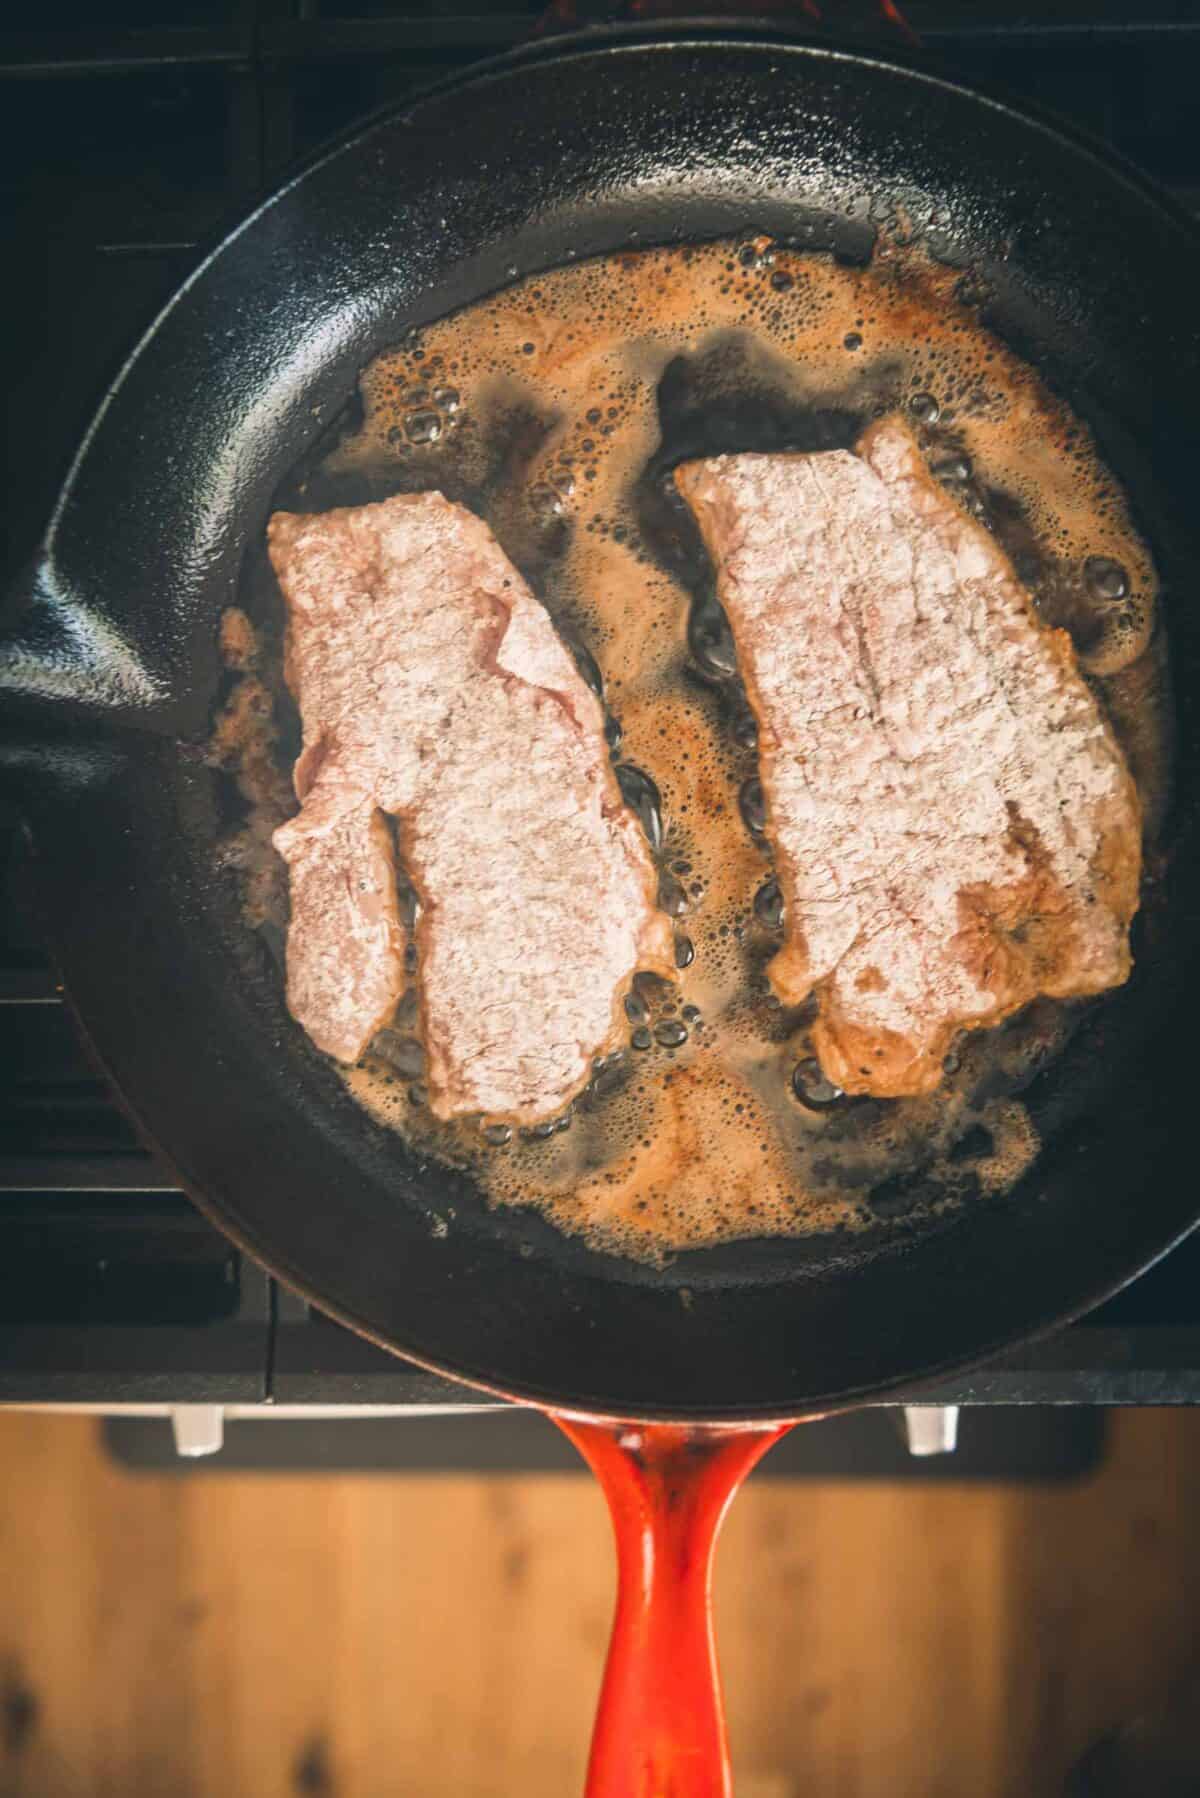 Veal cutlets in a frying pan on top of a stove.